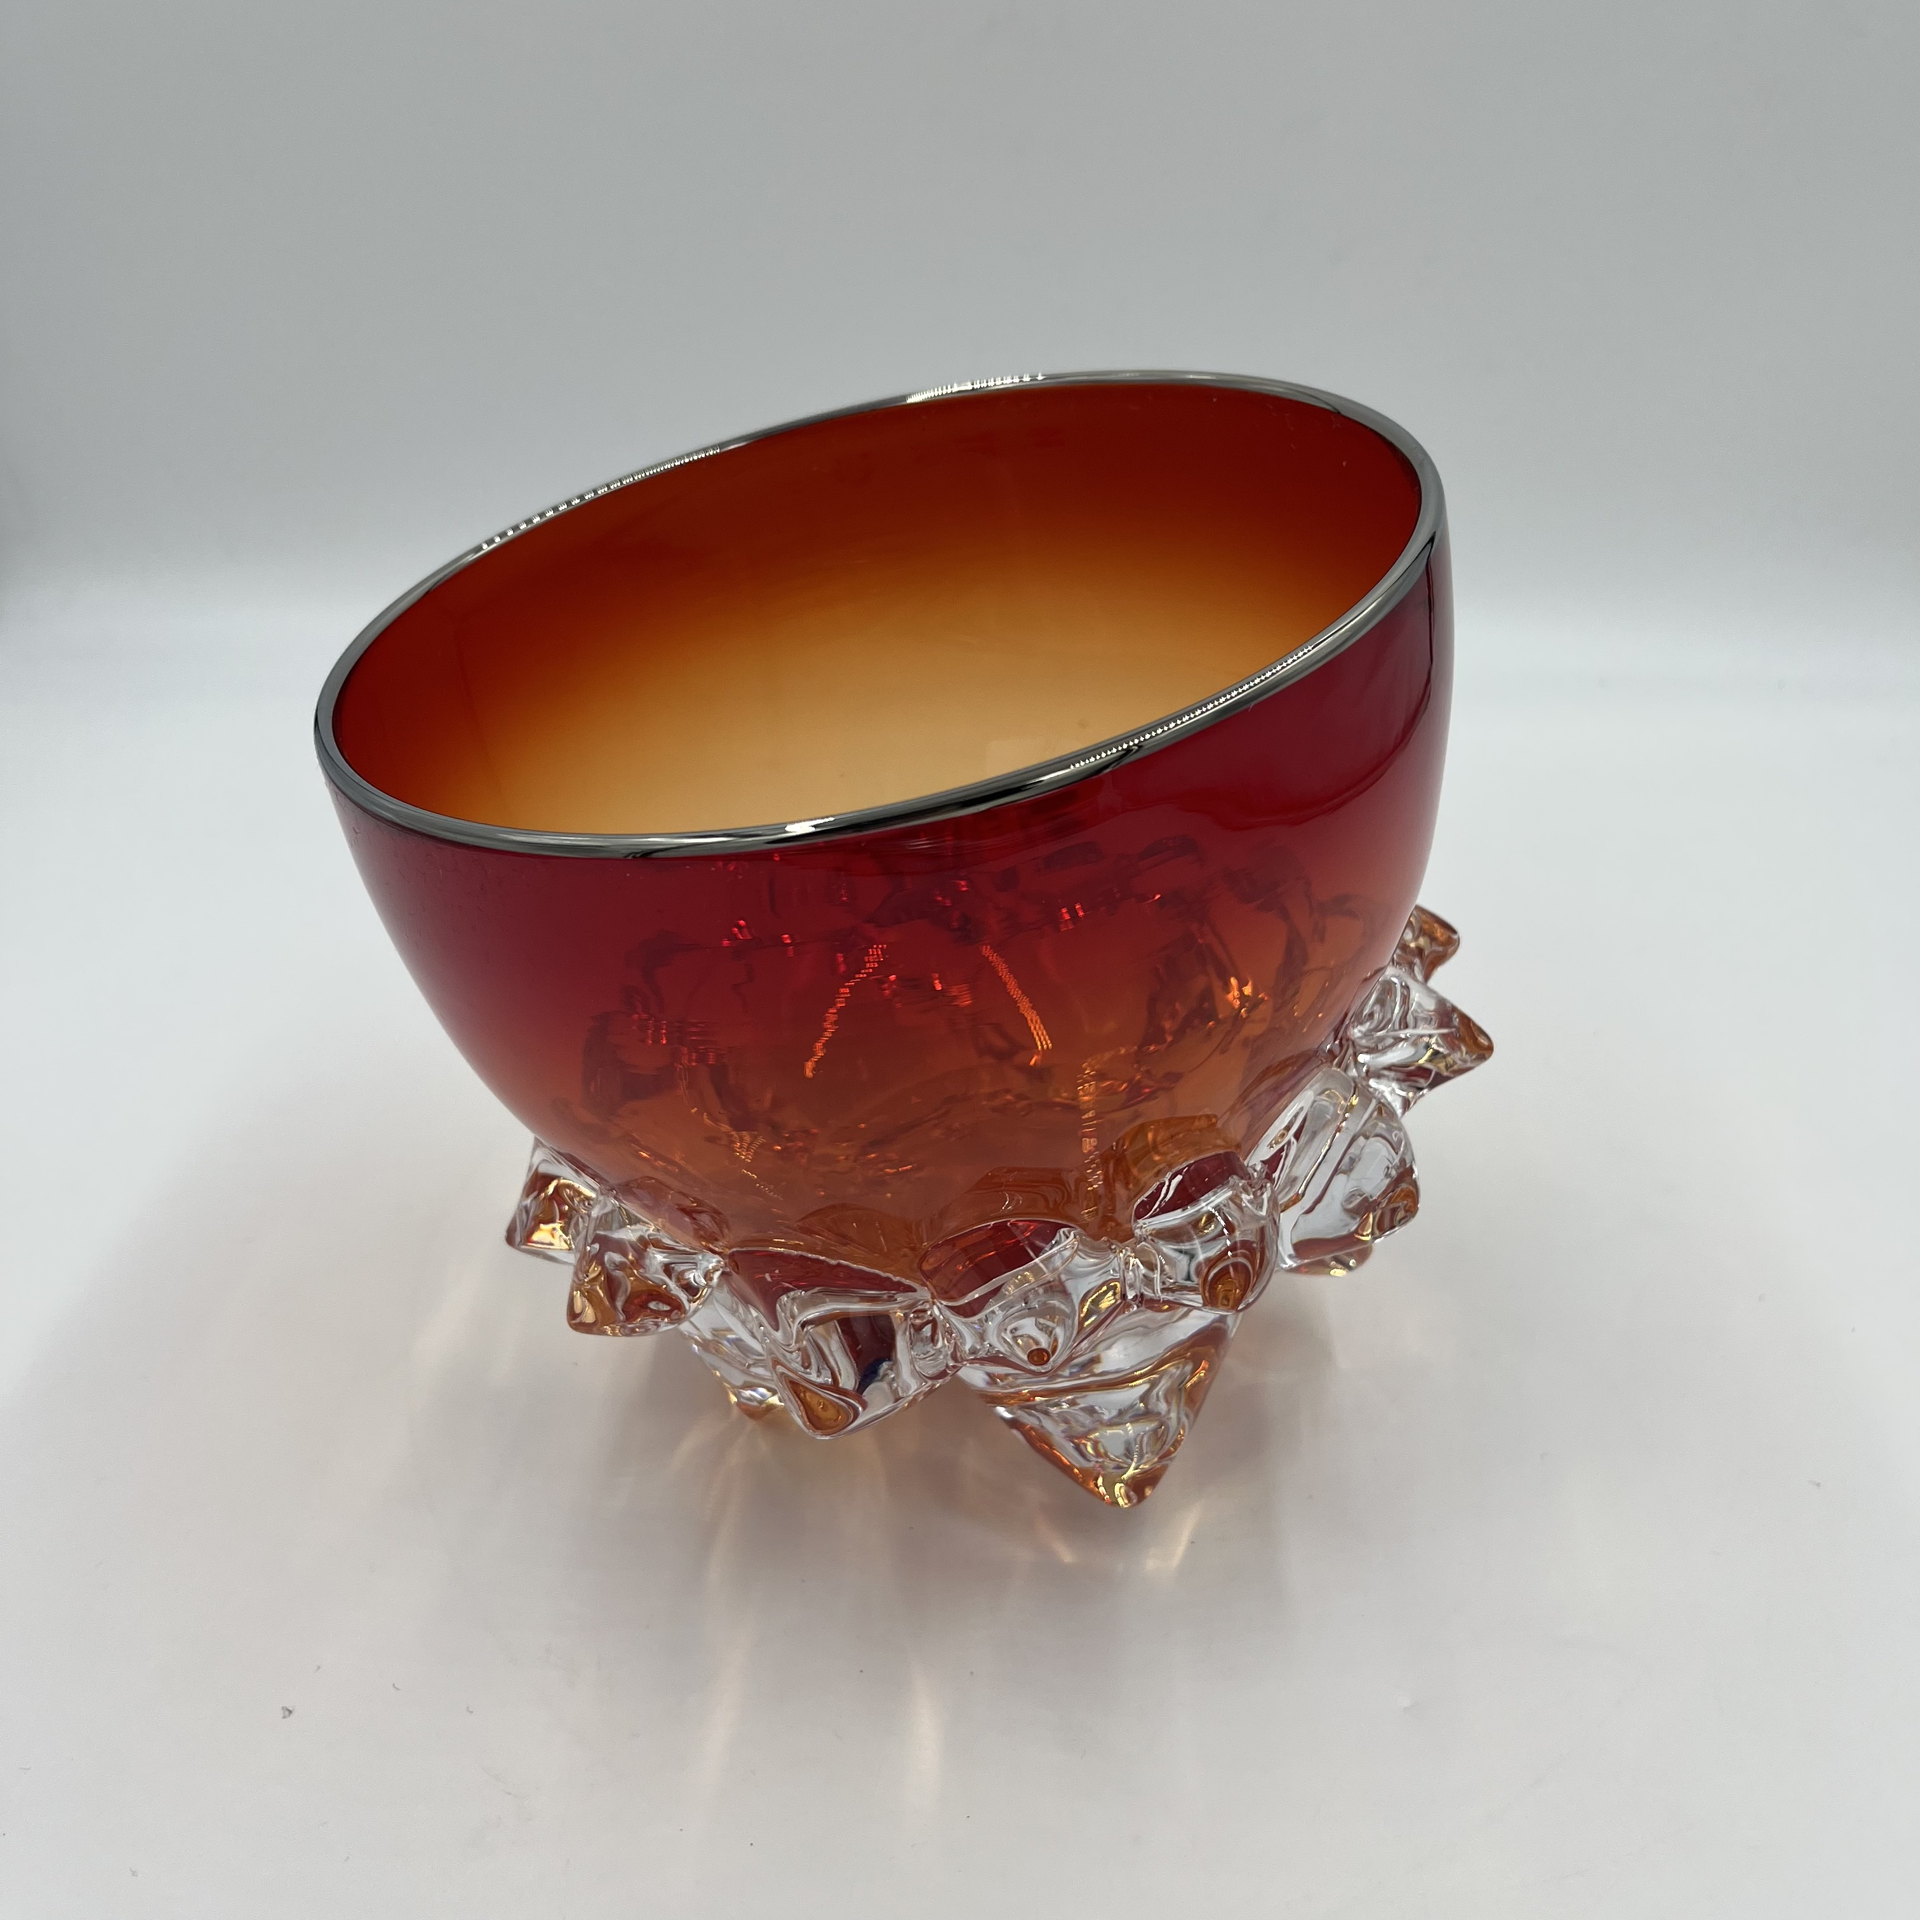 Cherry Red Thorn Vessel by Andrew Madvin